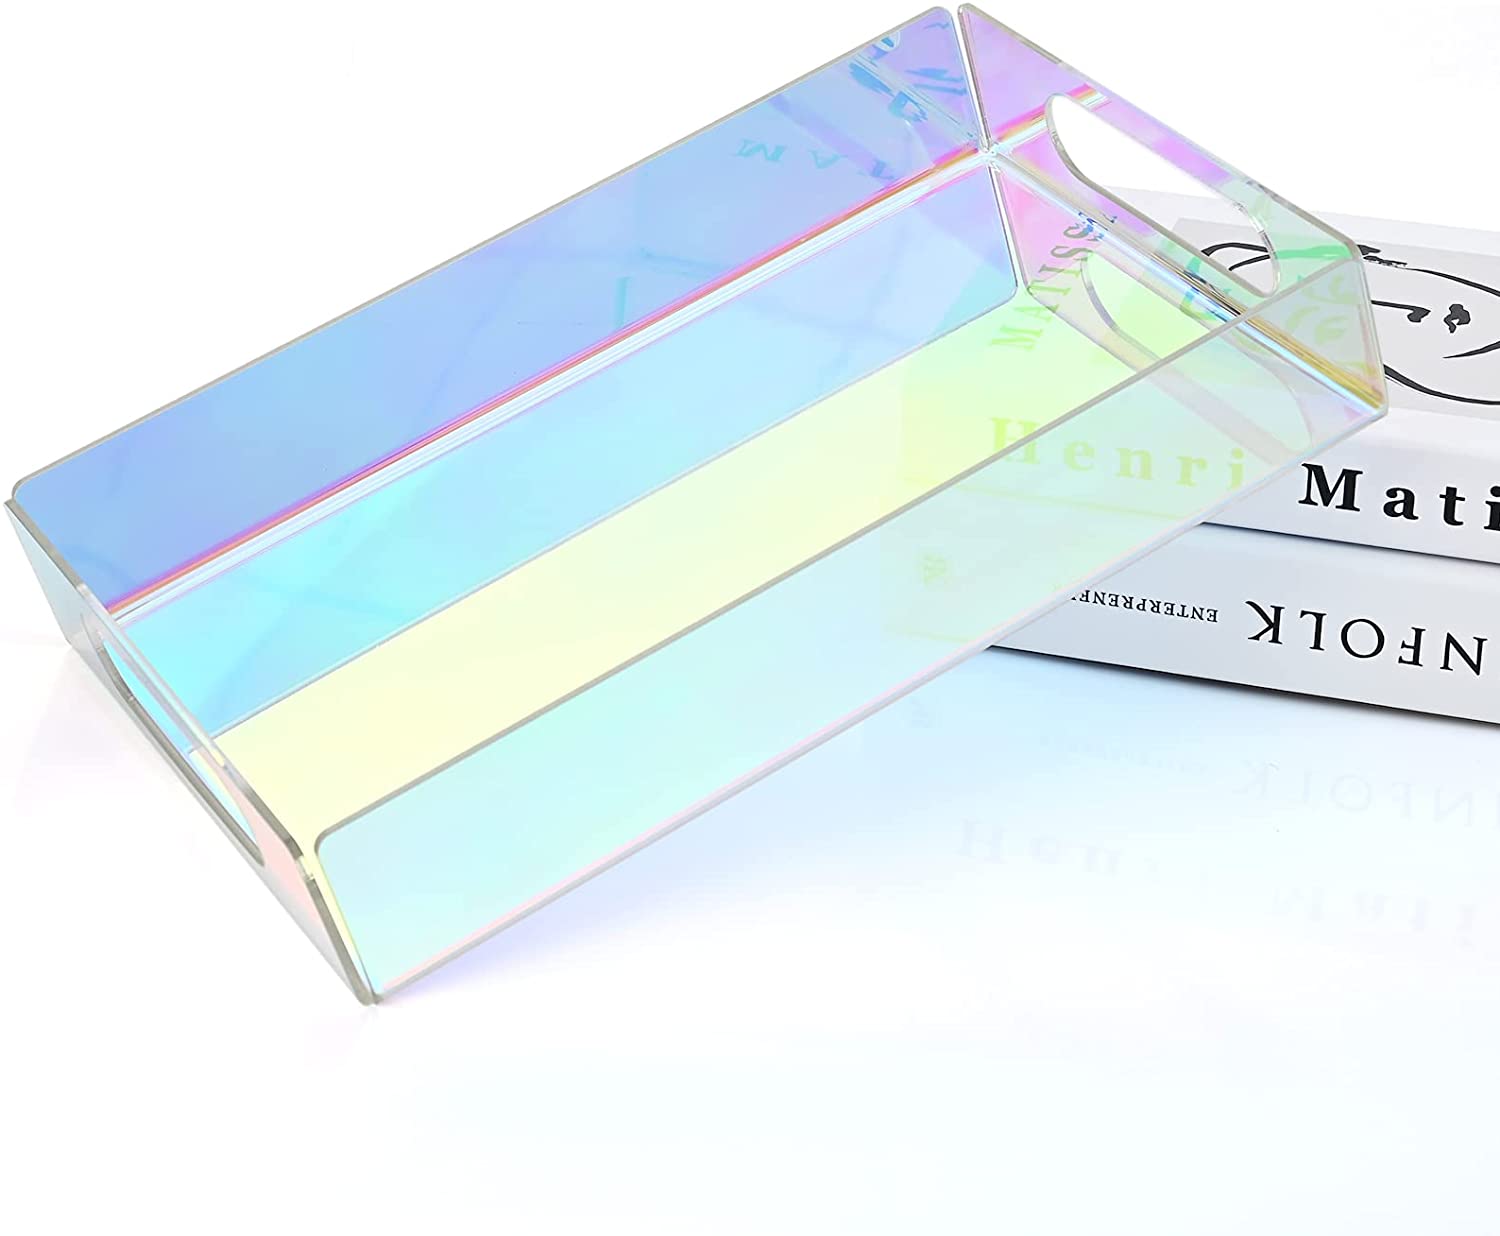 Iridescent Home Hotel Acrylic Fancy Serving Tray 